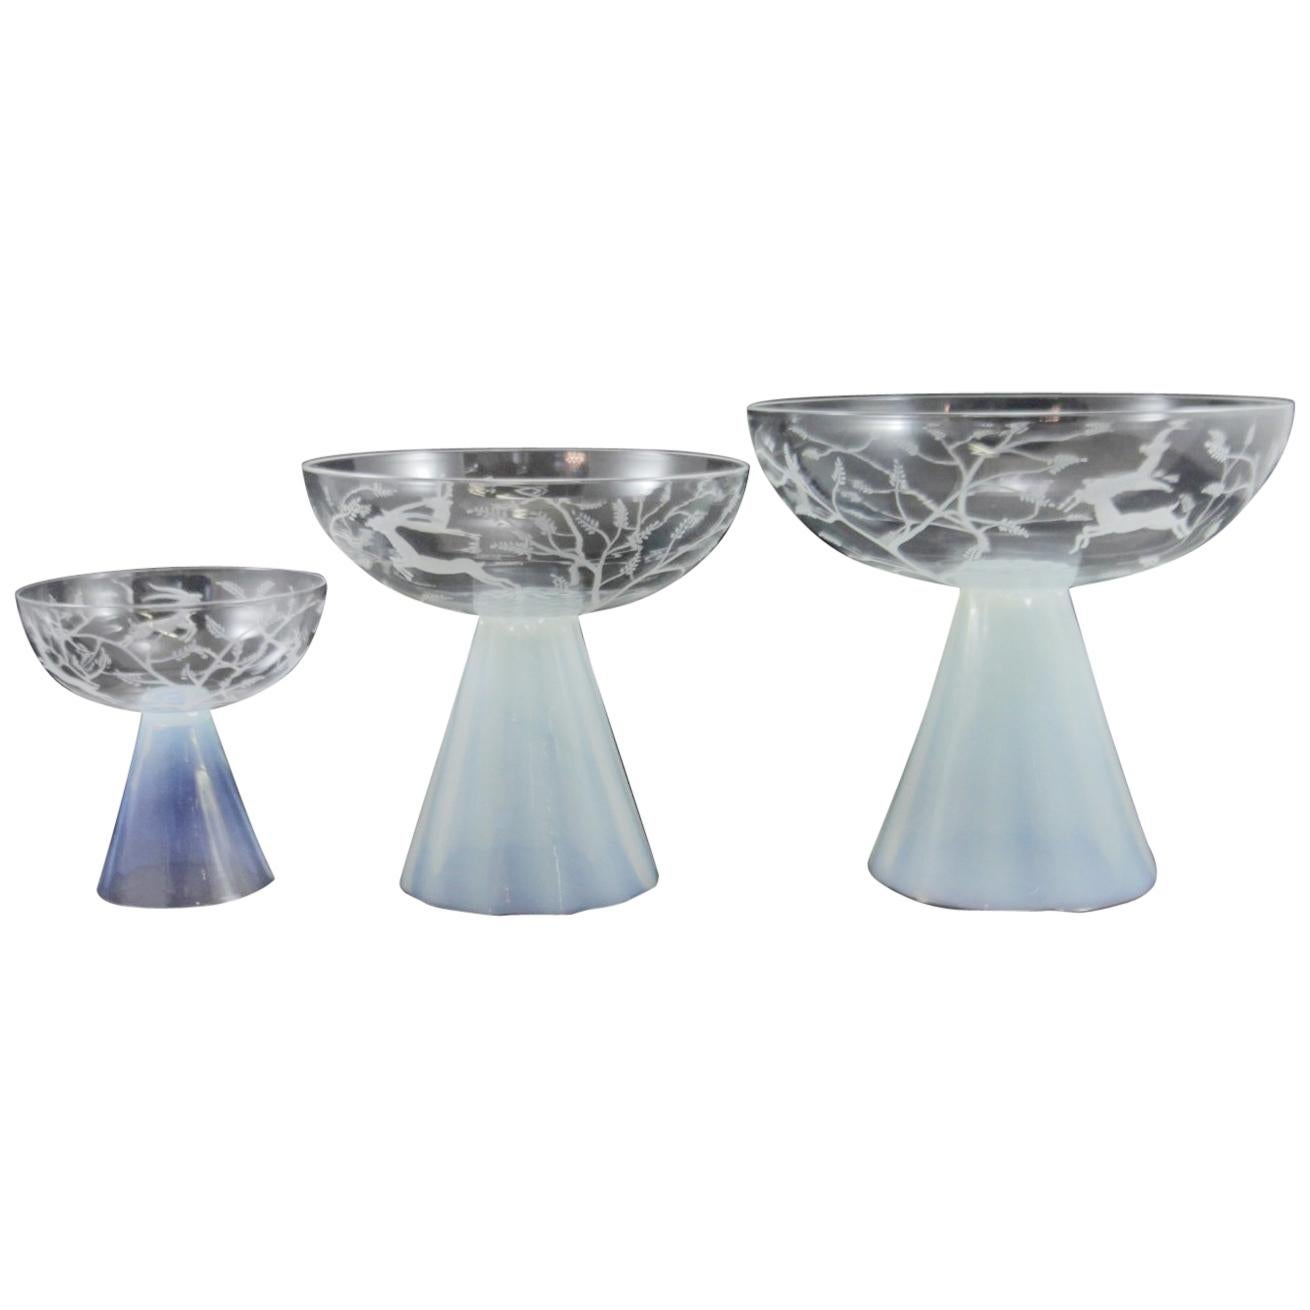 Trio of Etched Glass Tazzas by Vittorio Zecchin For Sale